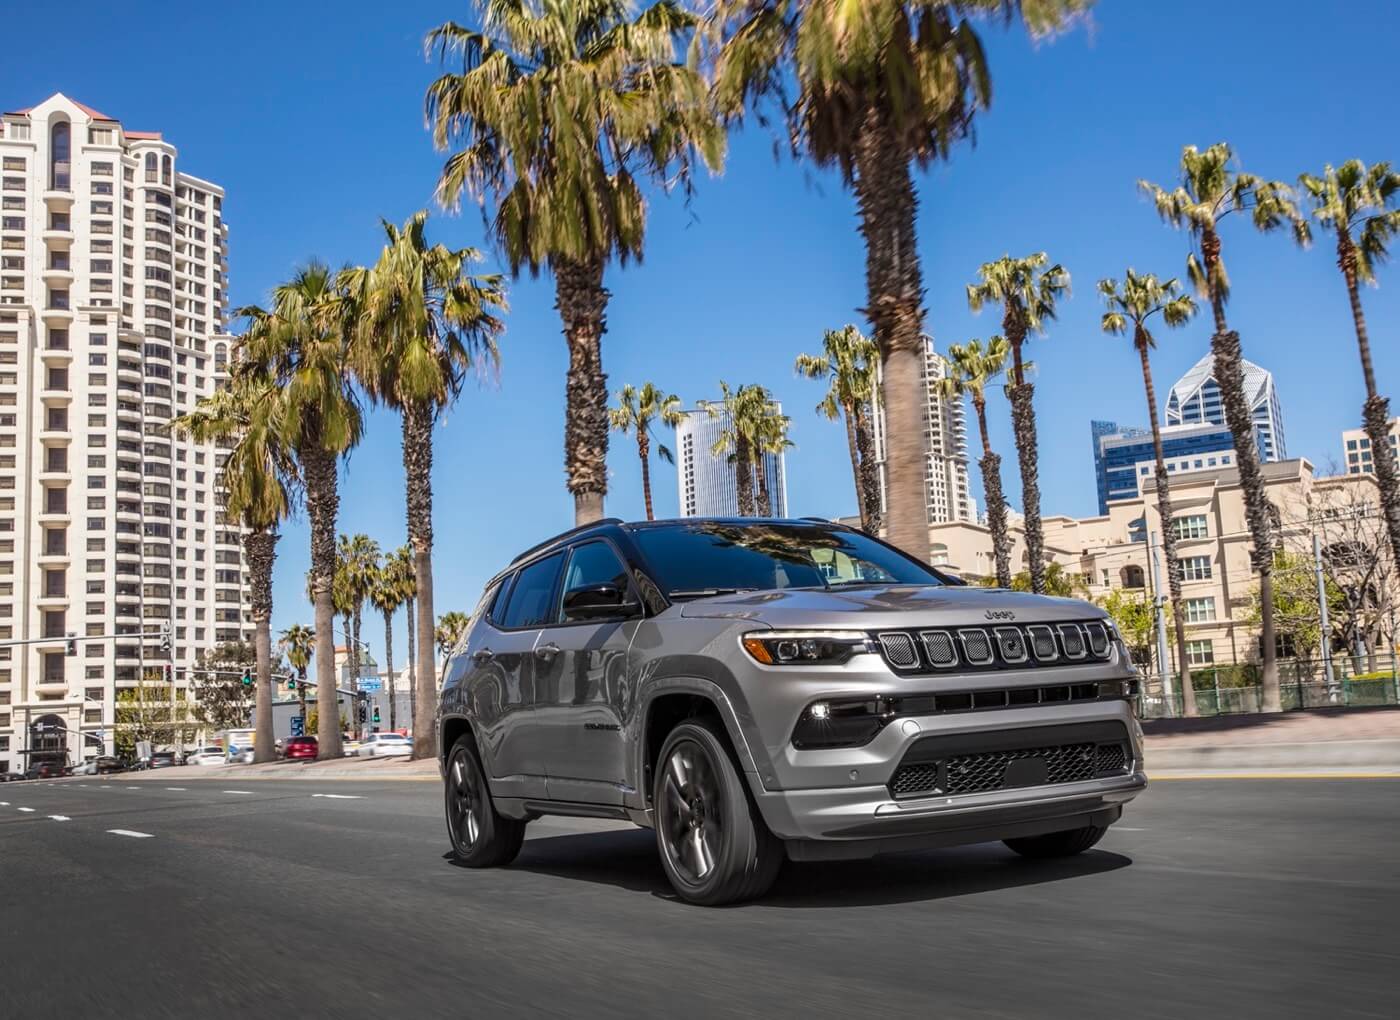 lateral front view of the 2022 Jeep Compass driven on a city street